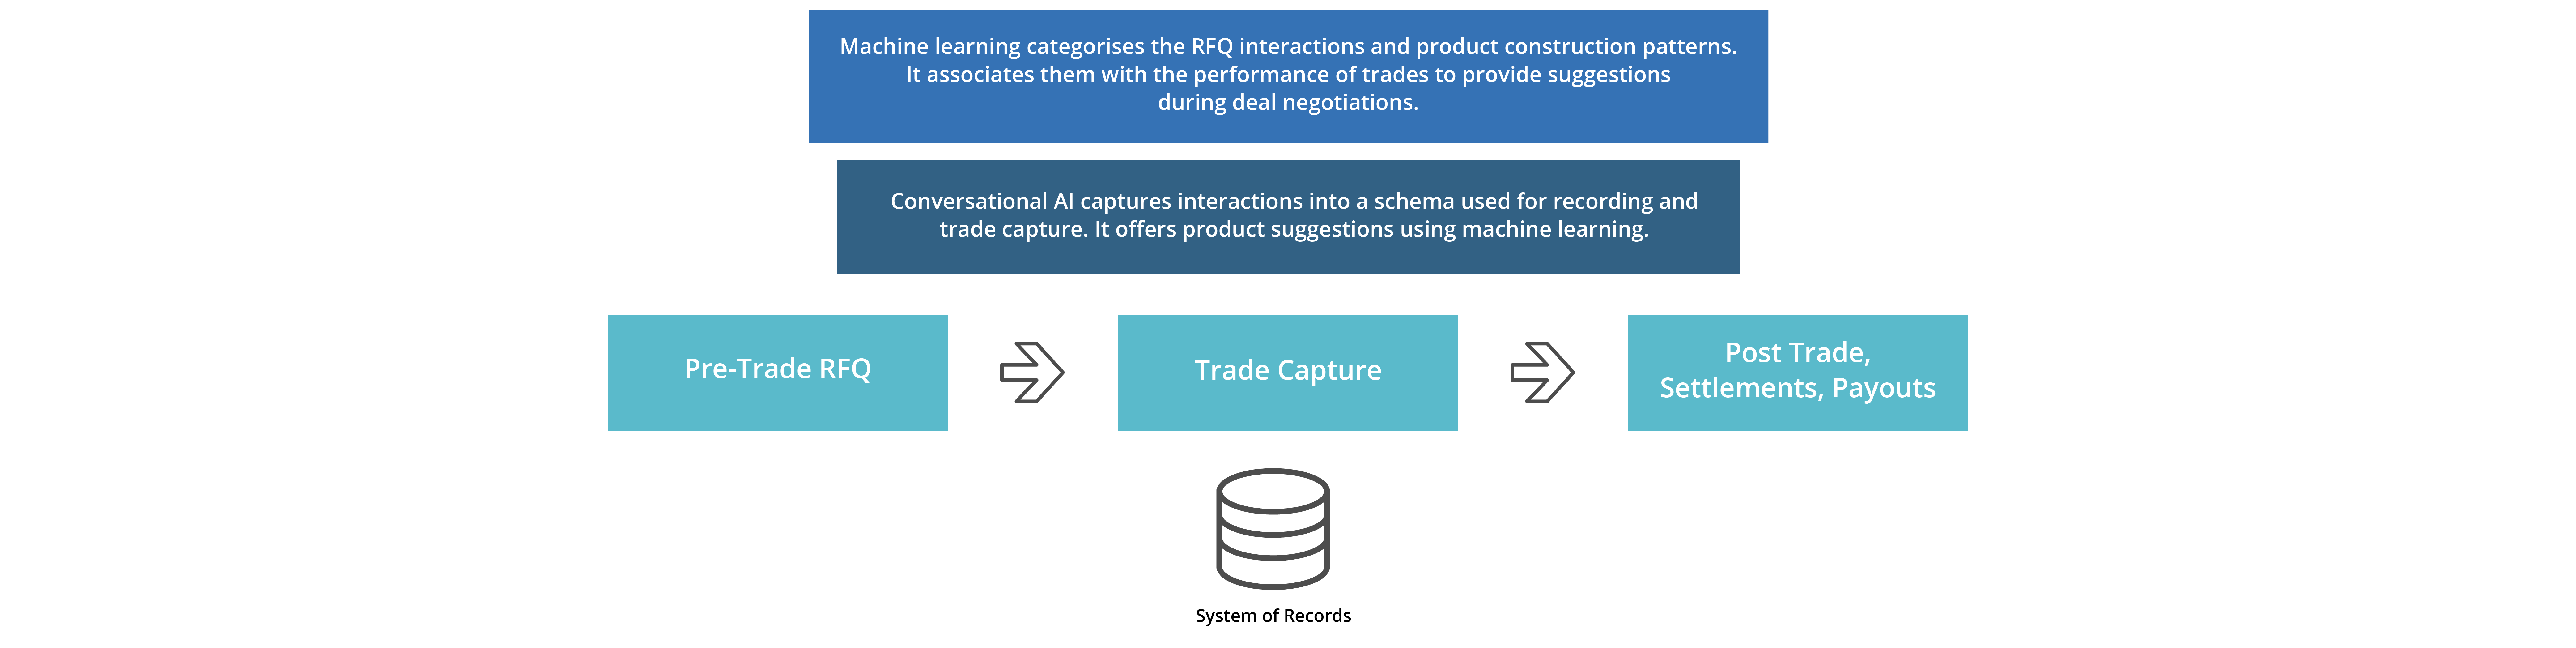 Conversational AI systems can capture semi-structured Request For Quotes (RFQ) conversations